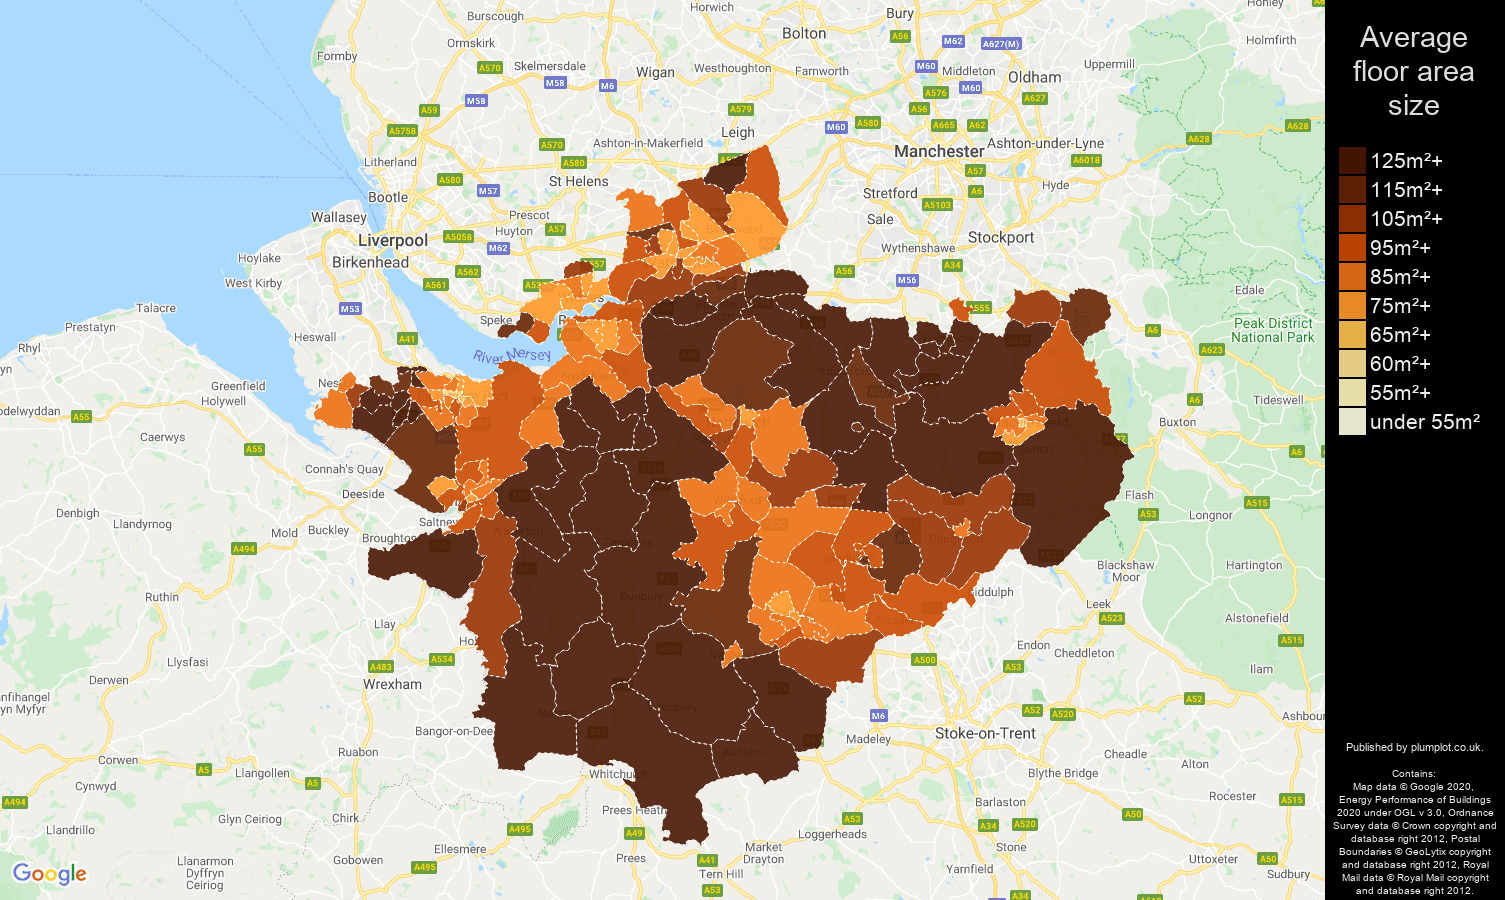 Cheshire map of average floor area size of houses